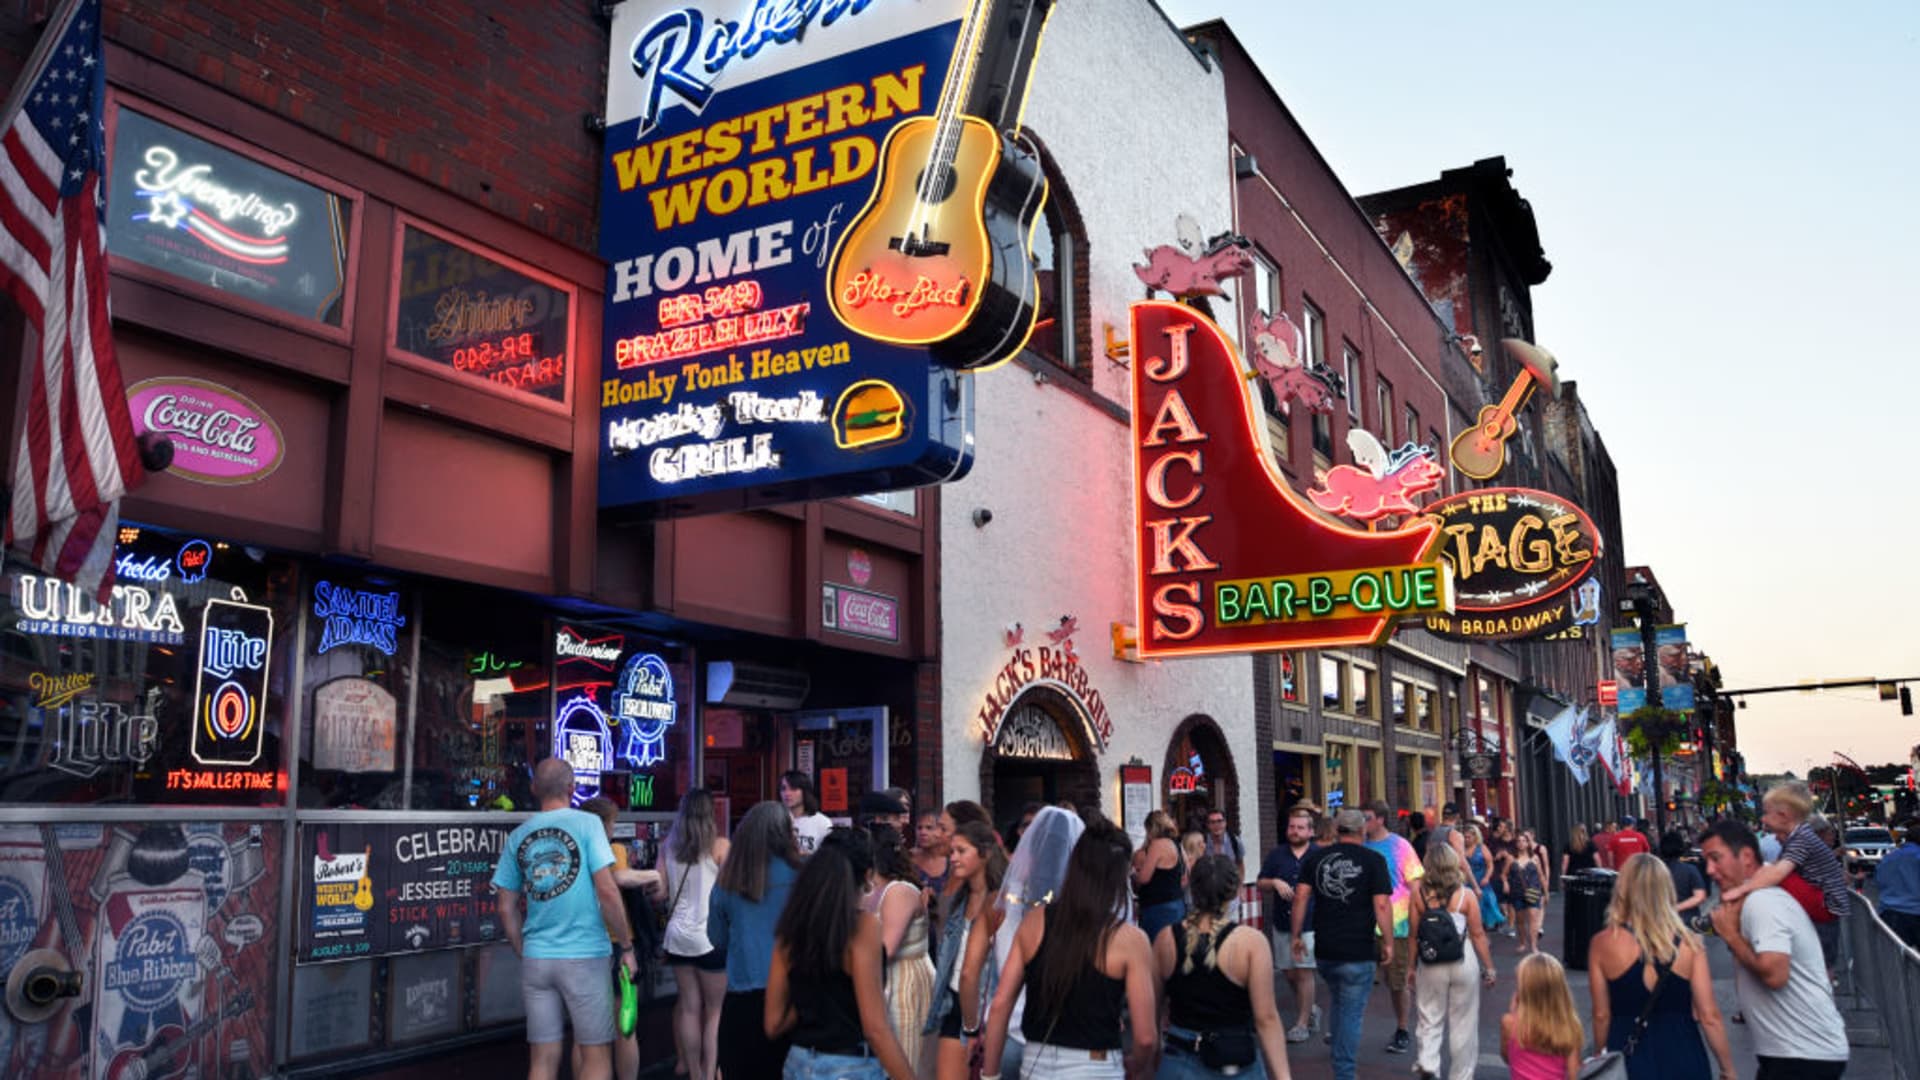 Nashville’s startup scene is booming. Here’s why investors and founders are moving to ‘Music City’